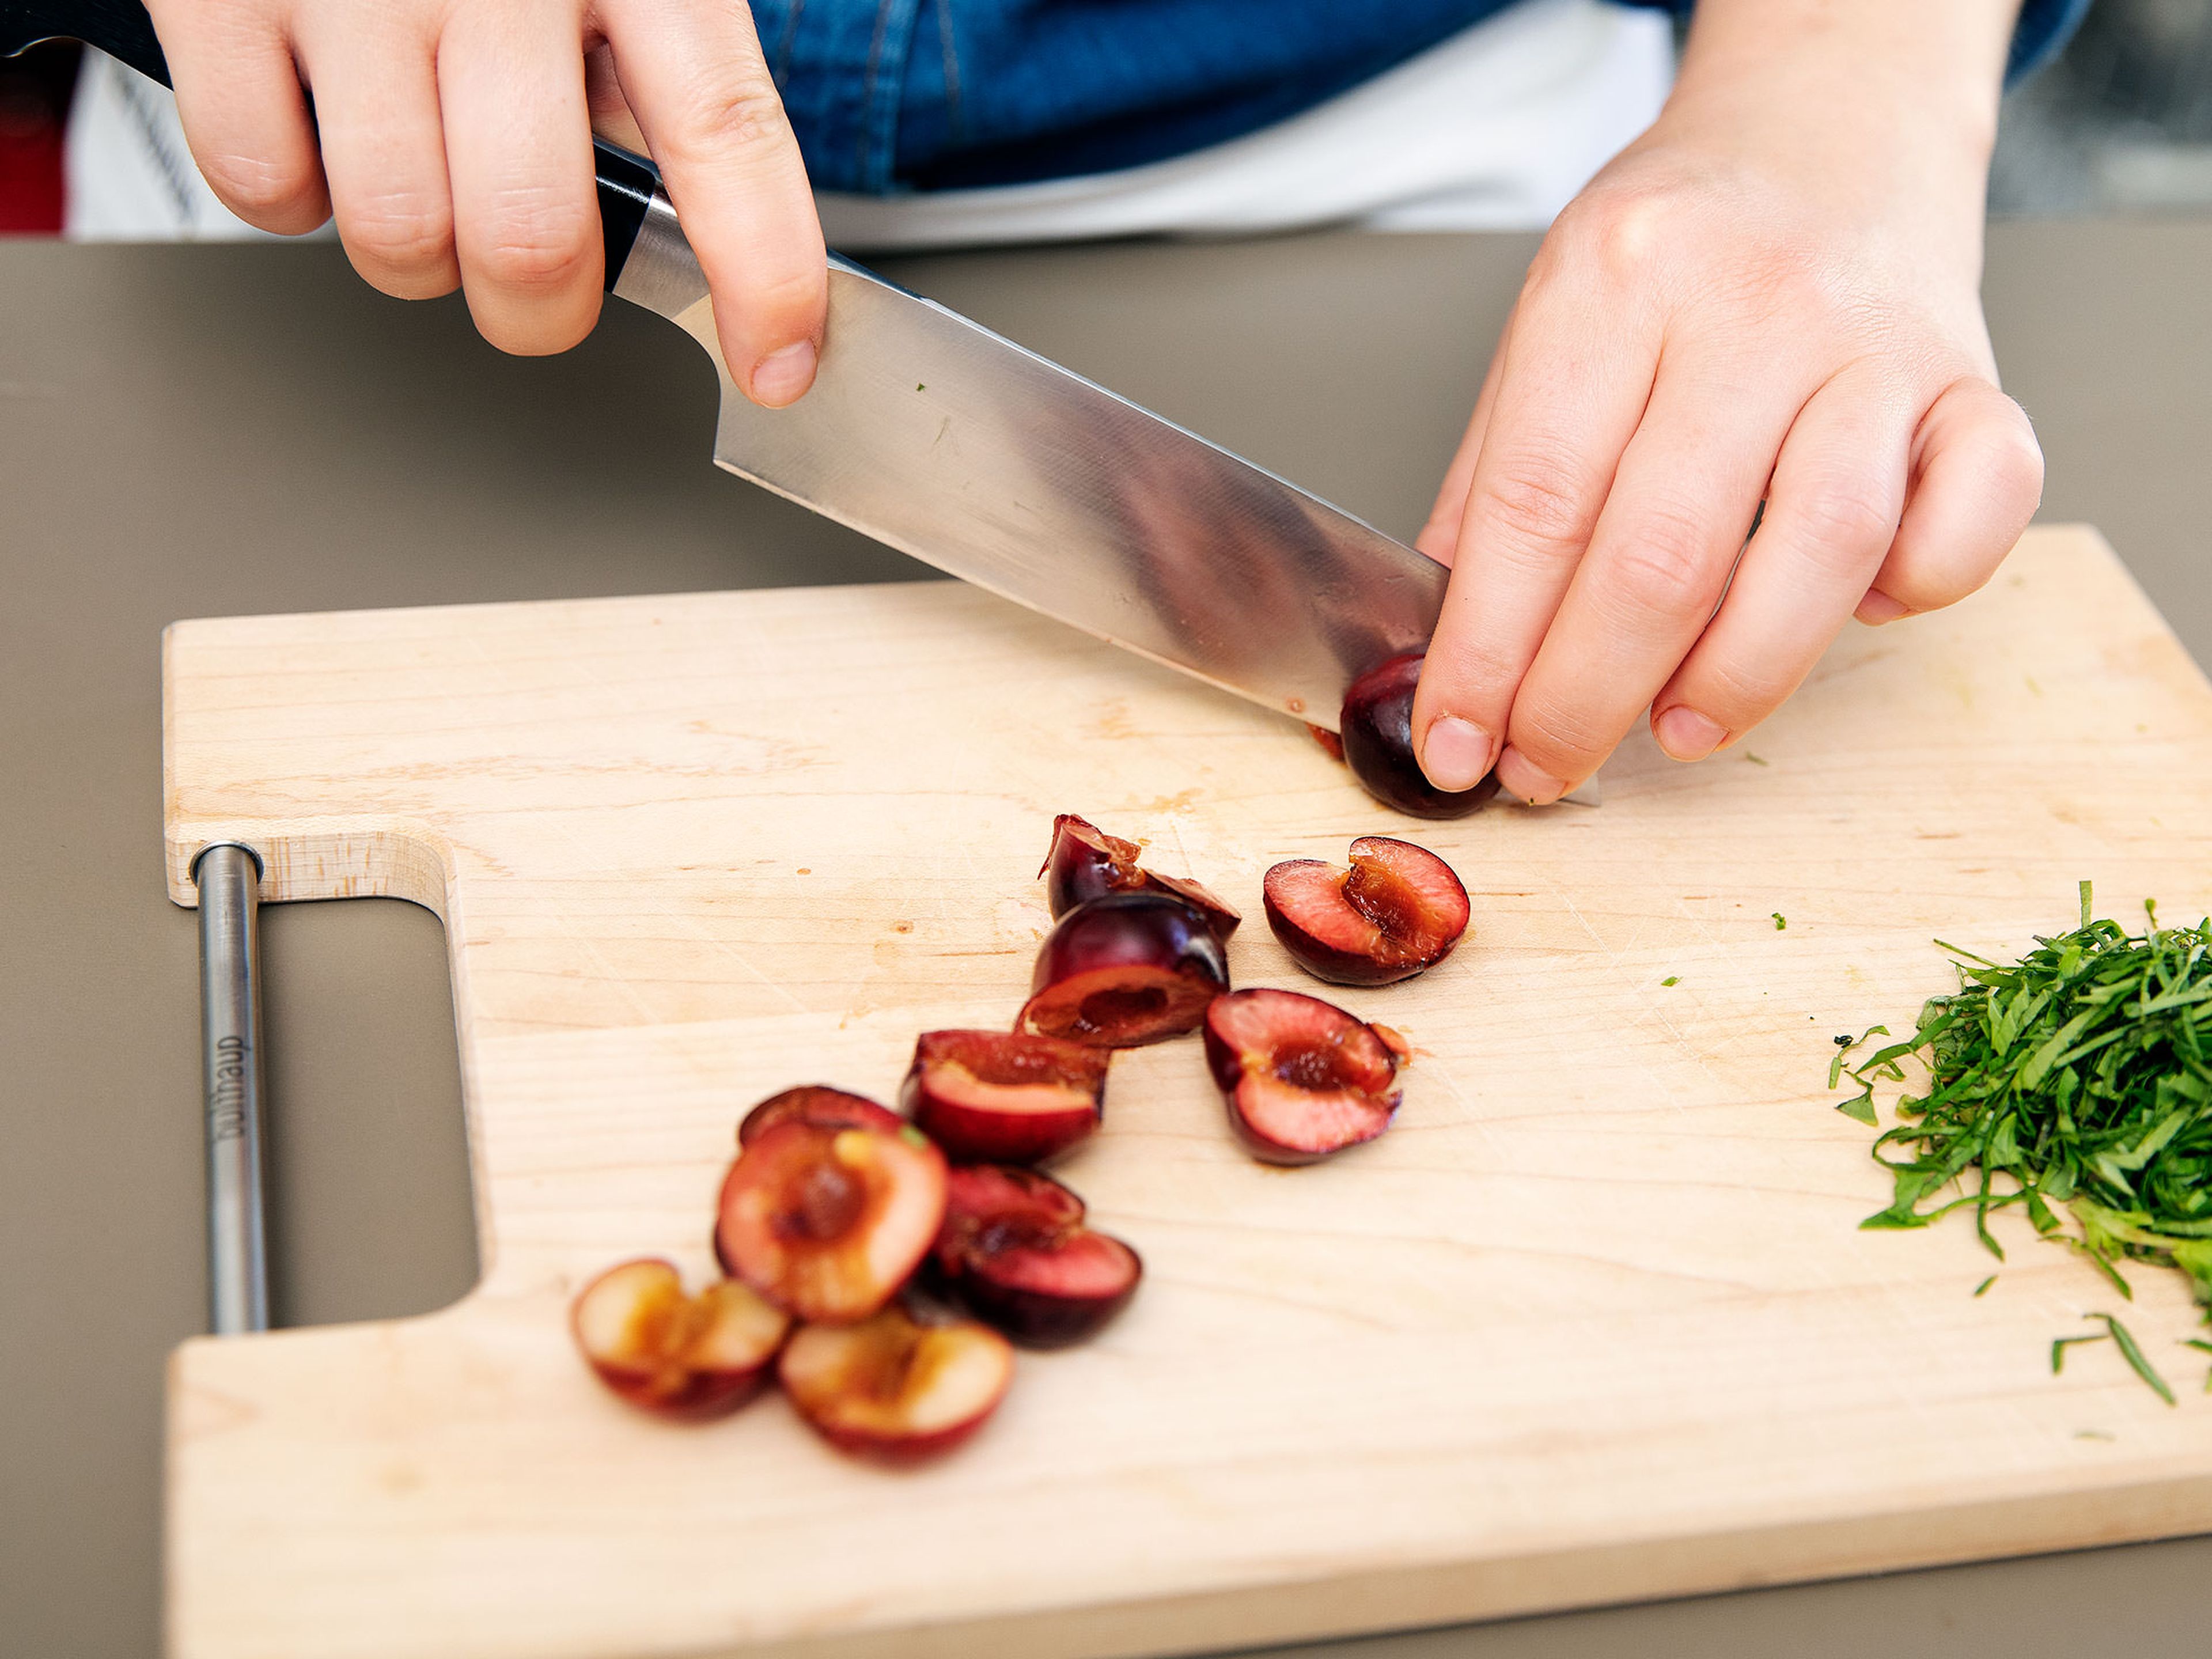 Using a knife, halve cherries and remove the pit. Pluck basil leaves from stems, thinly slice, and set aside until serving.